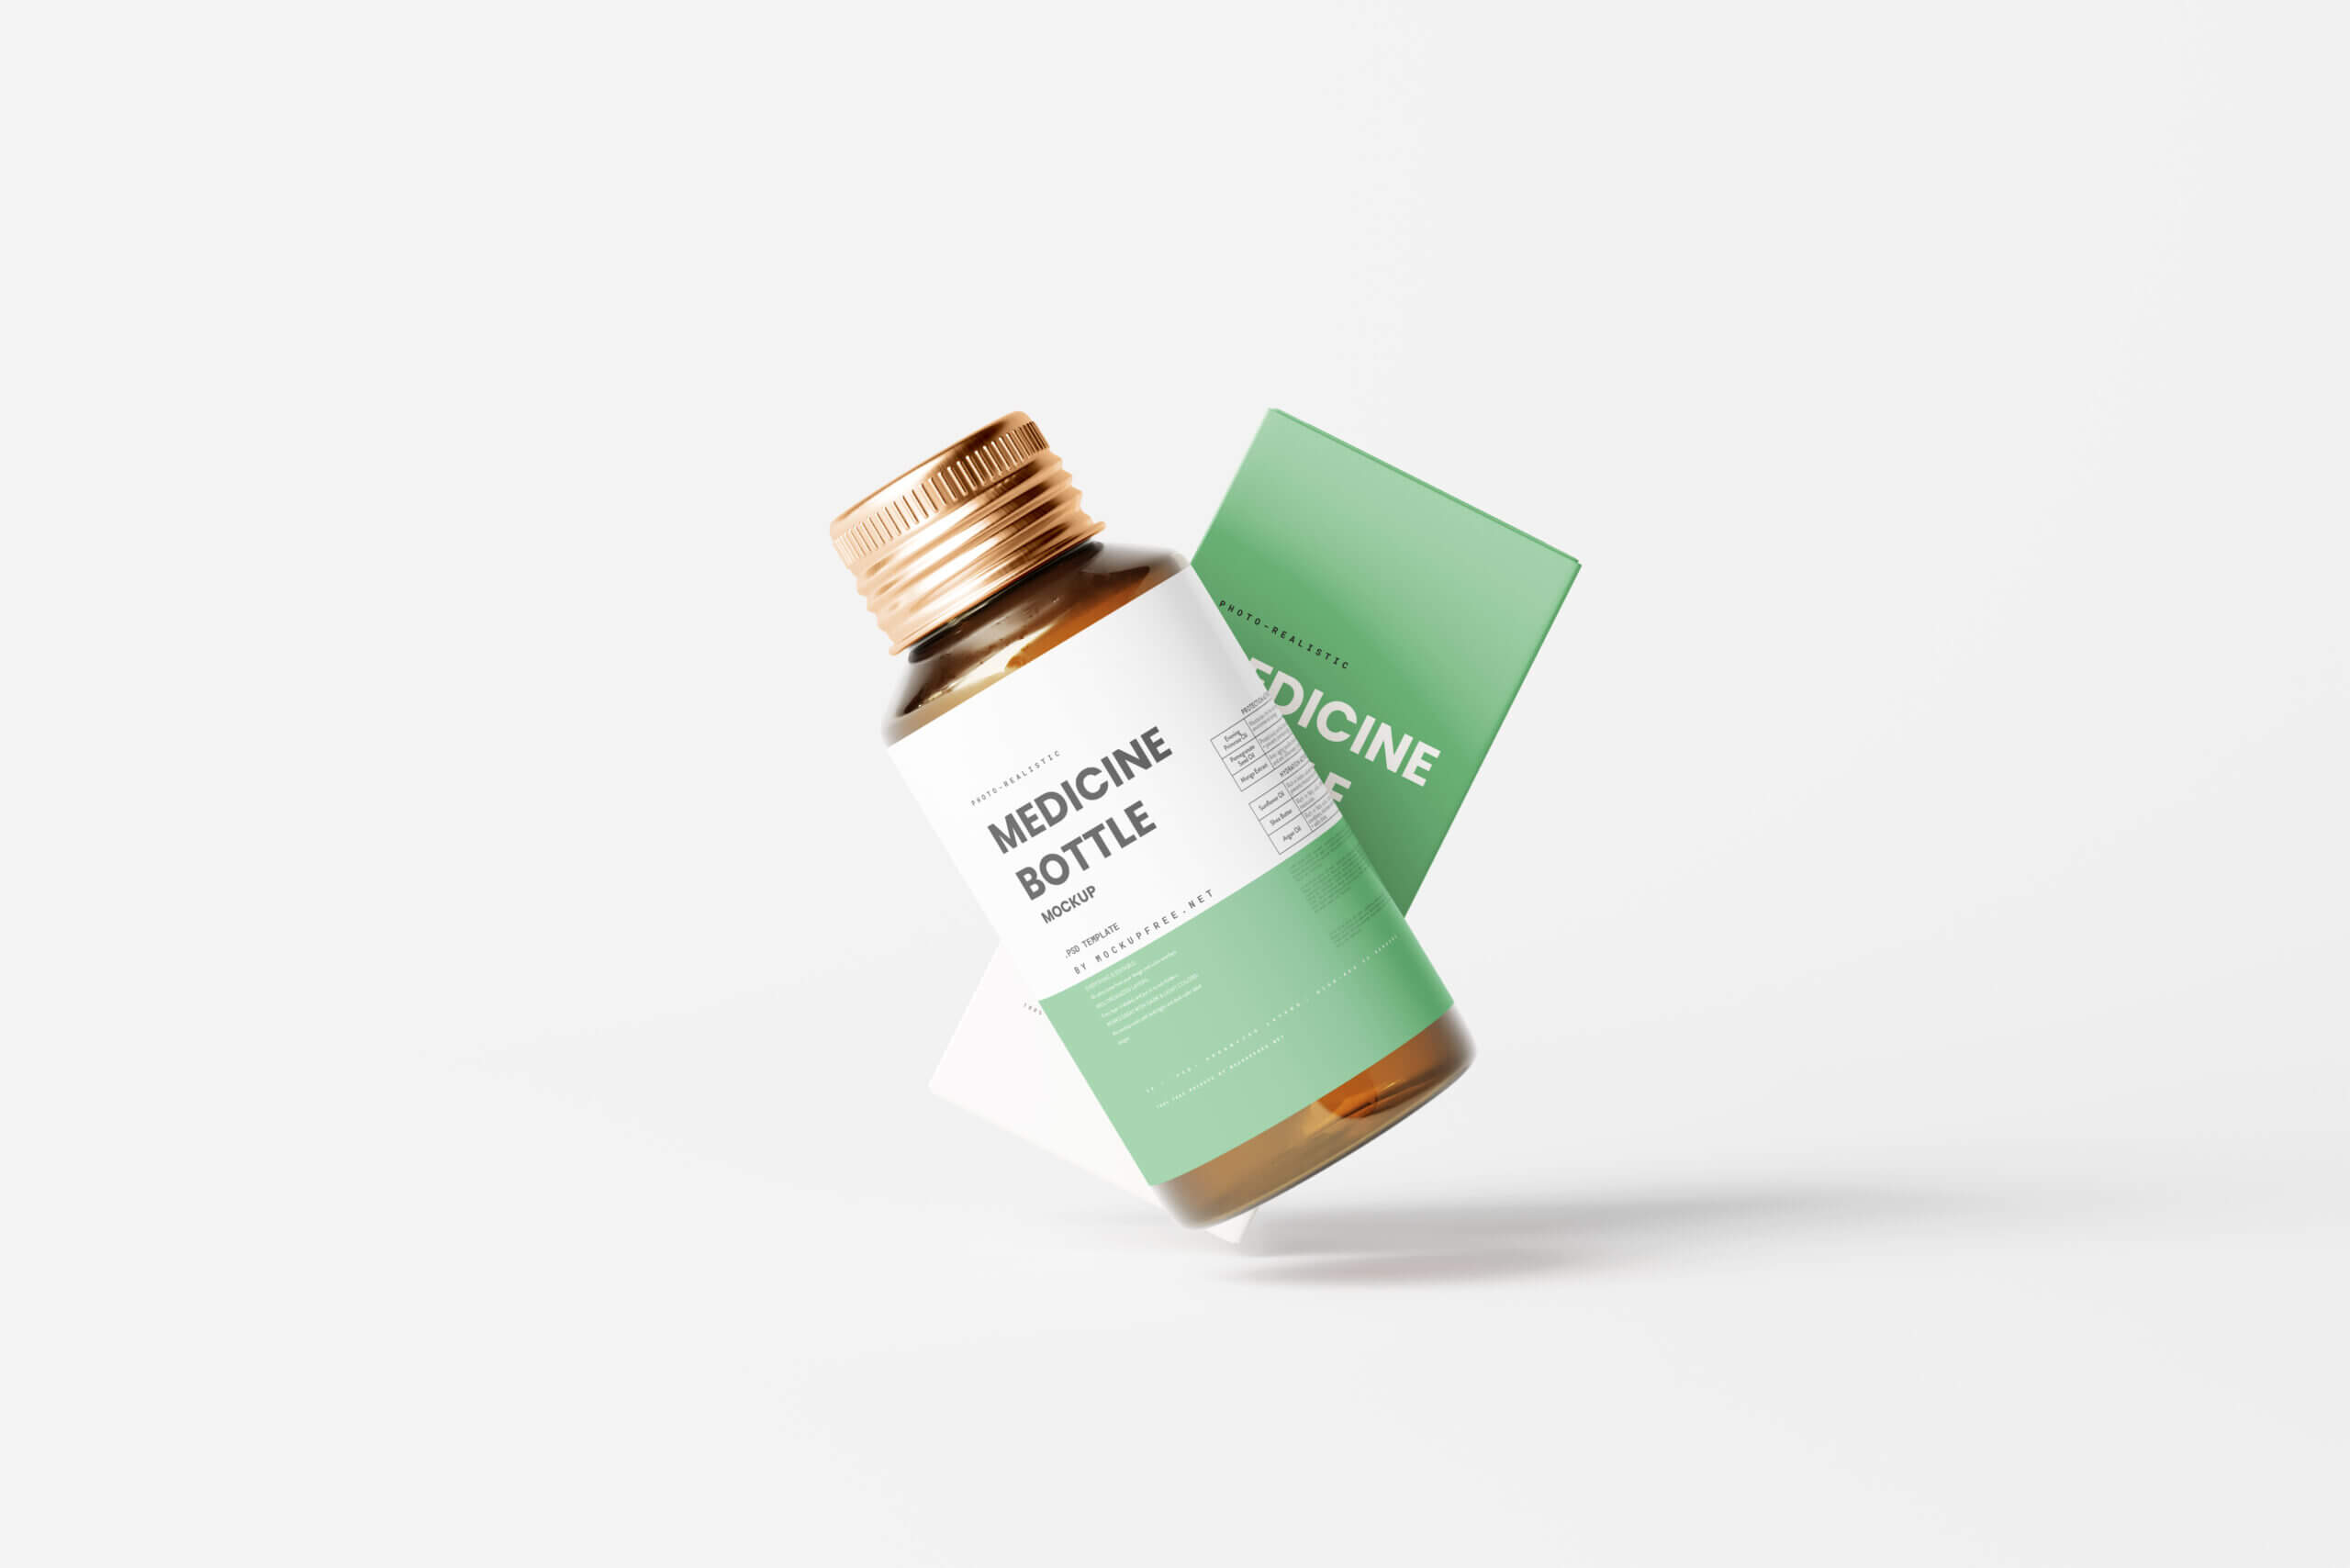 10 Free Amber Medicine Bottle With Box Mockup PSD Files3